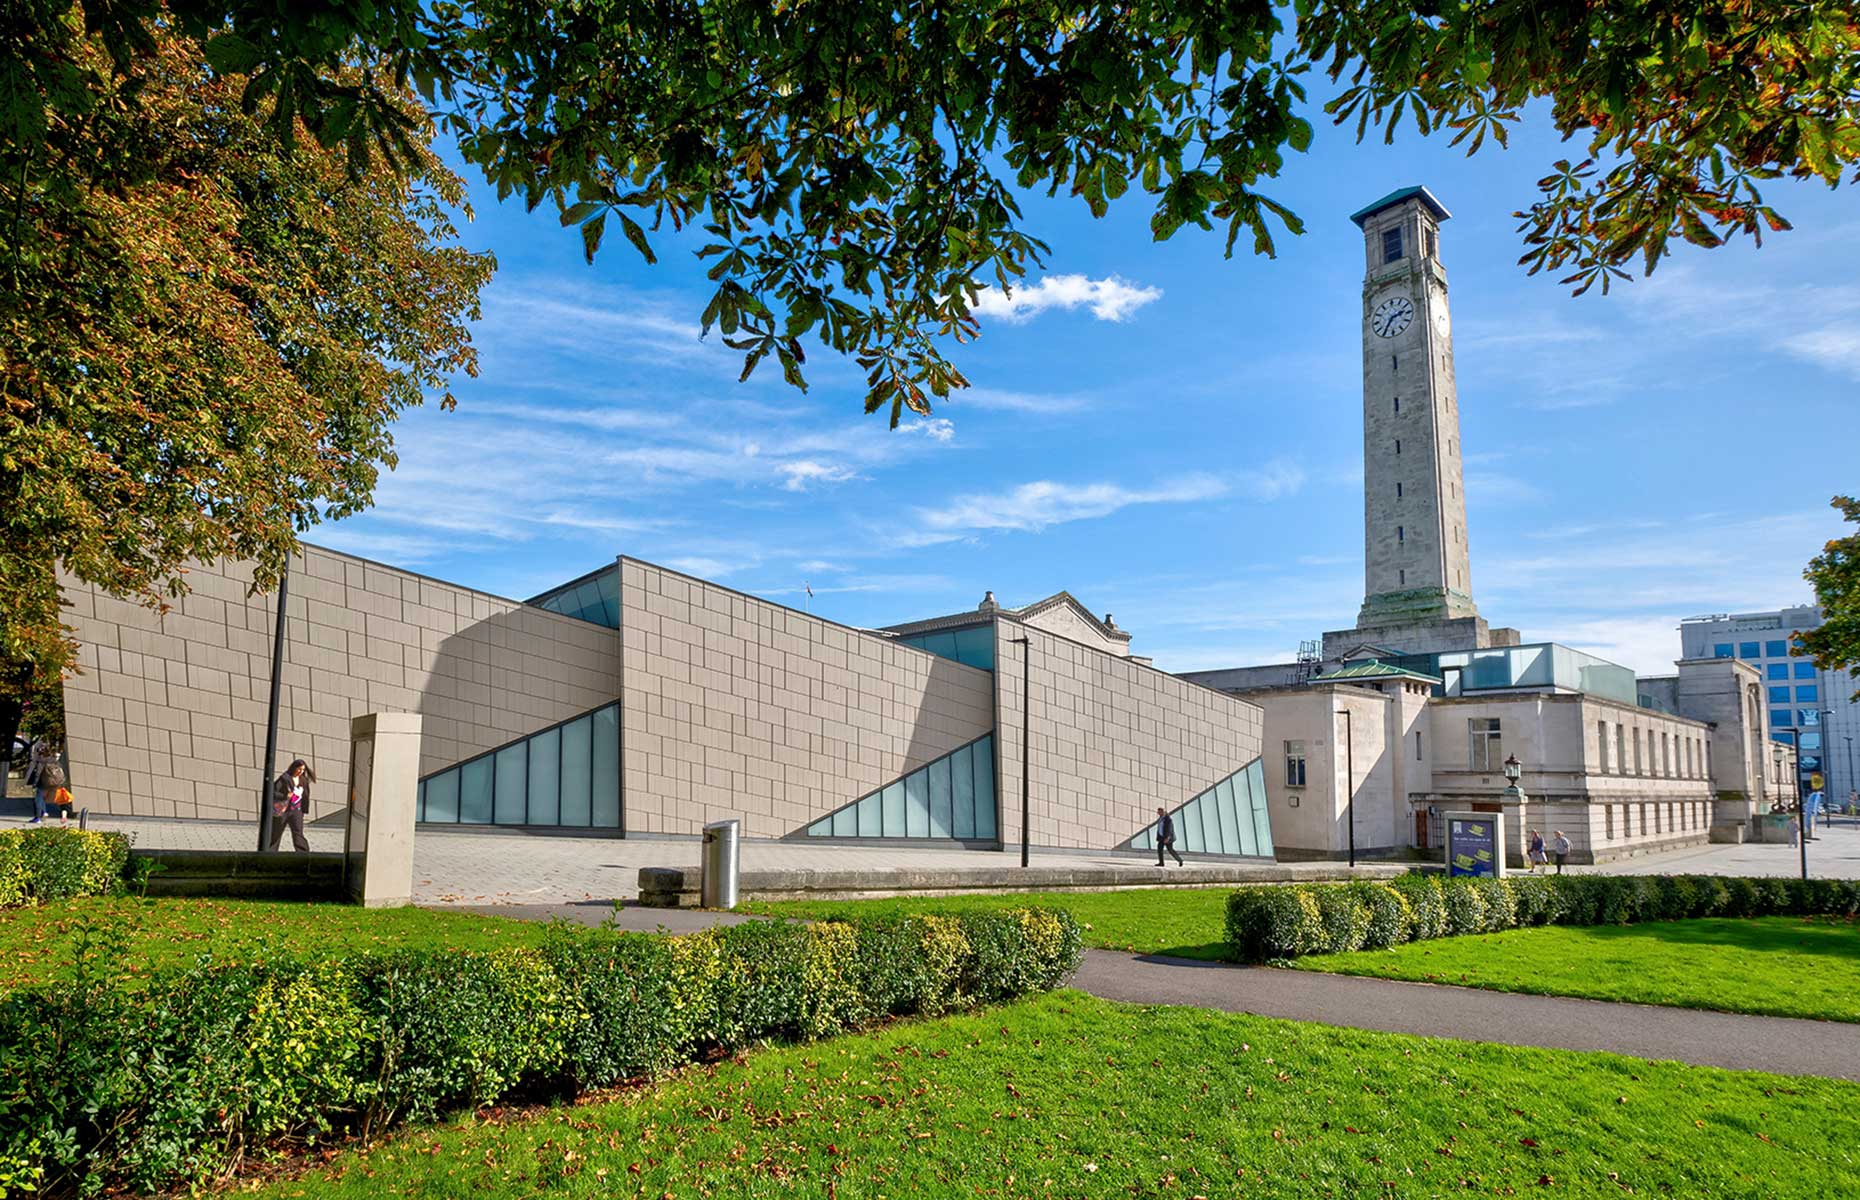 SeaCity Museum exterior on a sunny day in Southampton (Image: Courtesy of Visit Southampton)